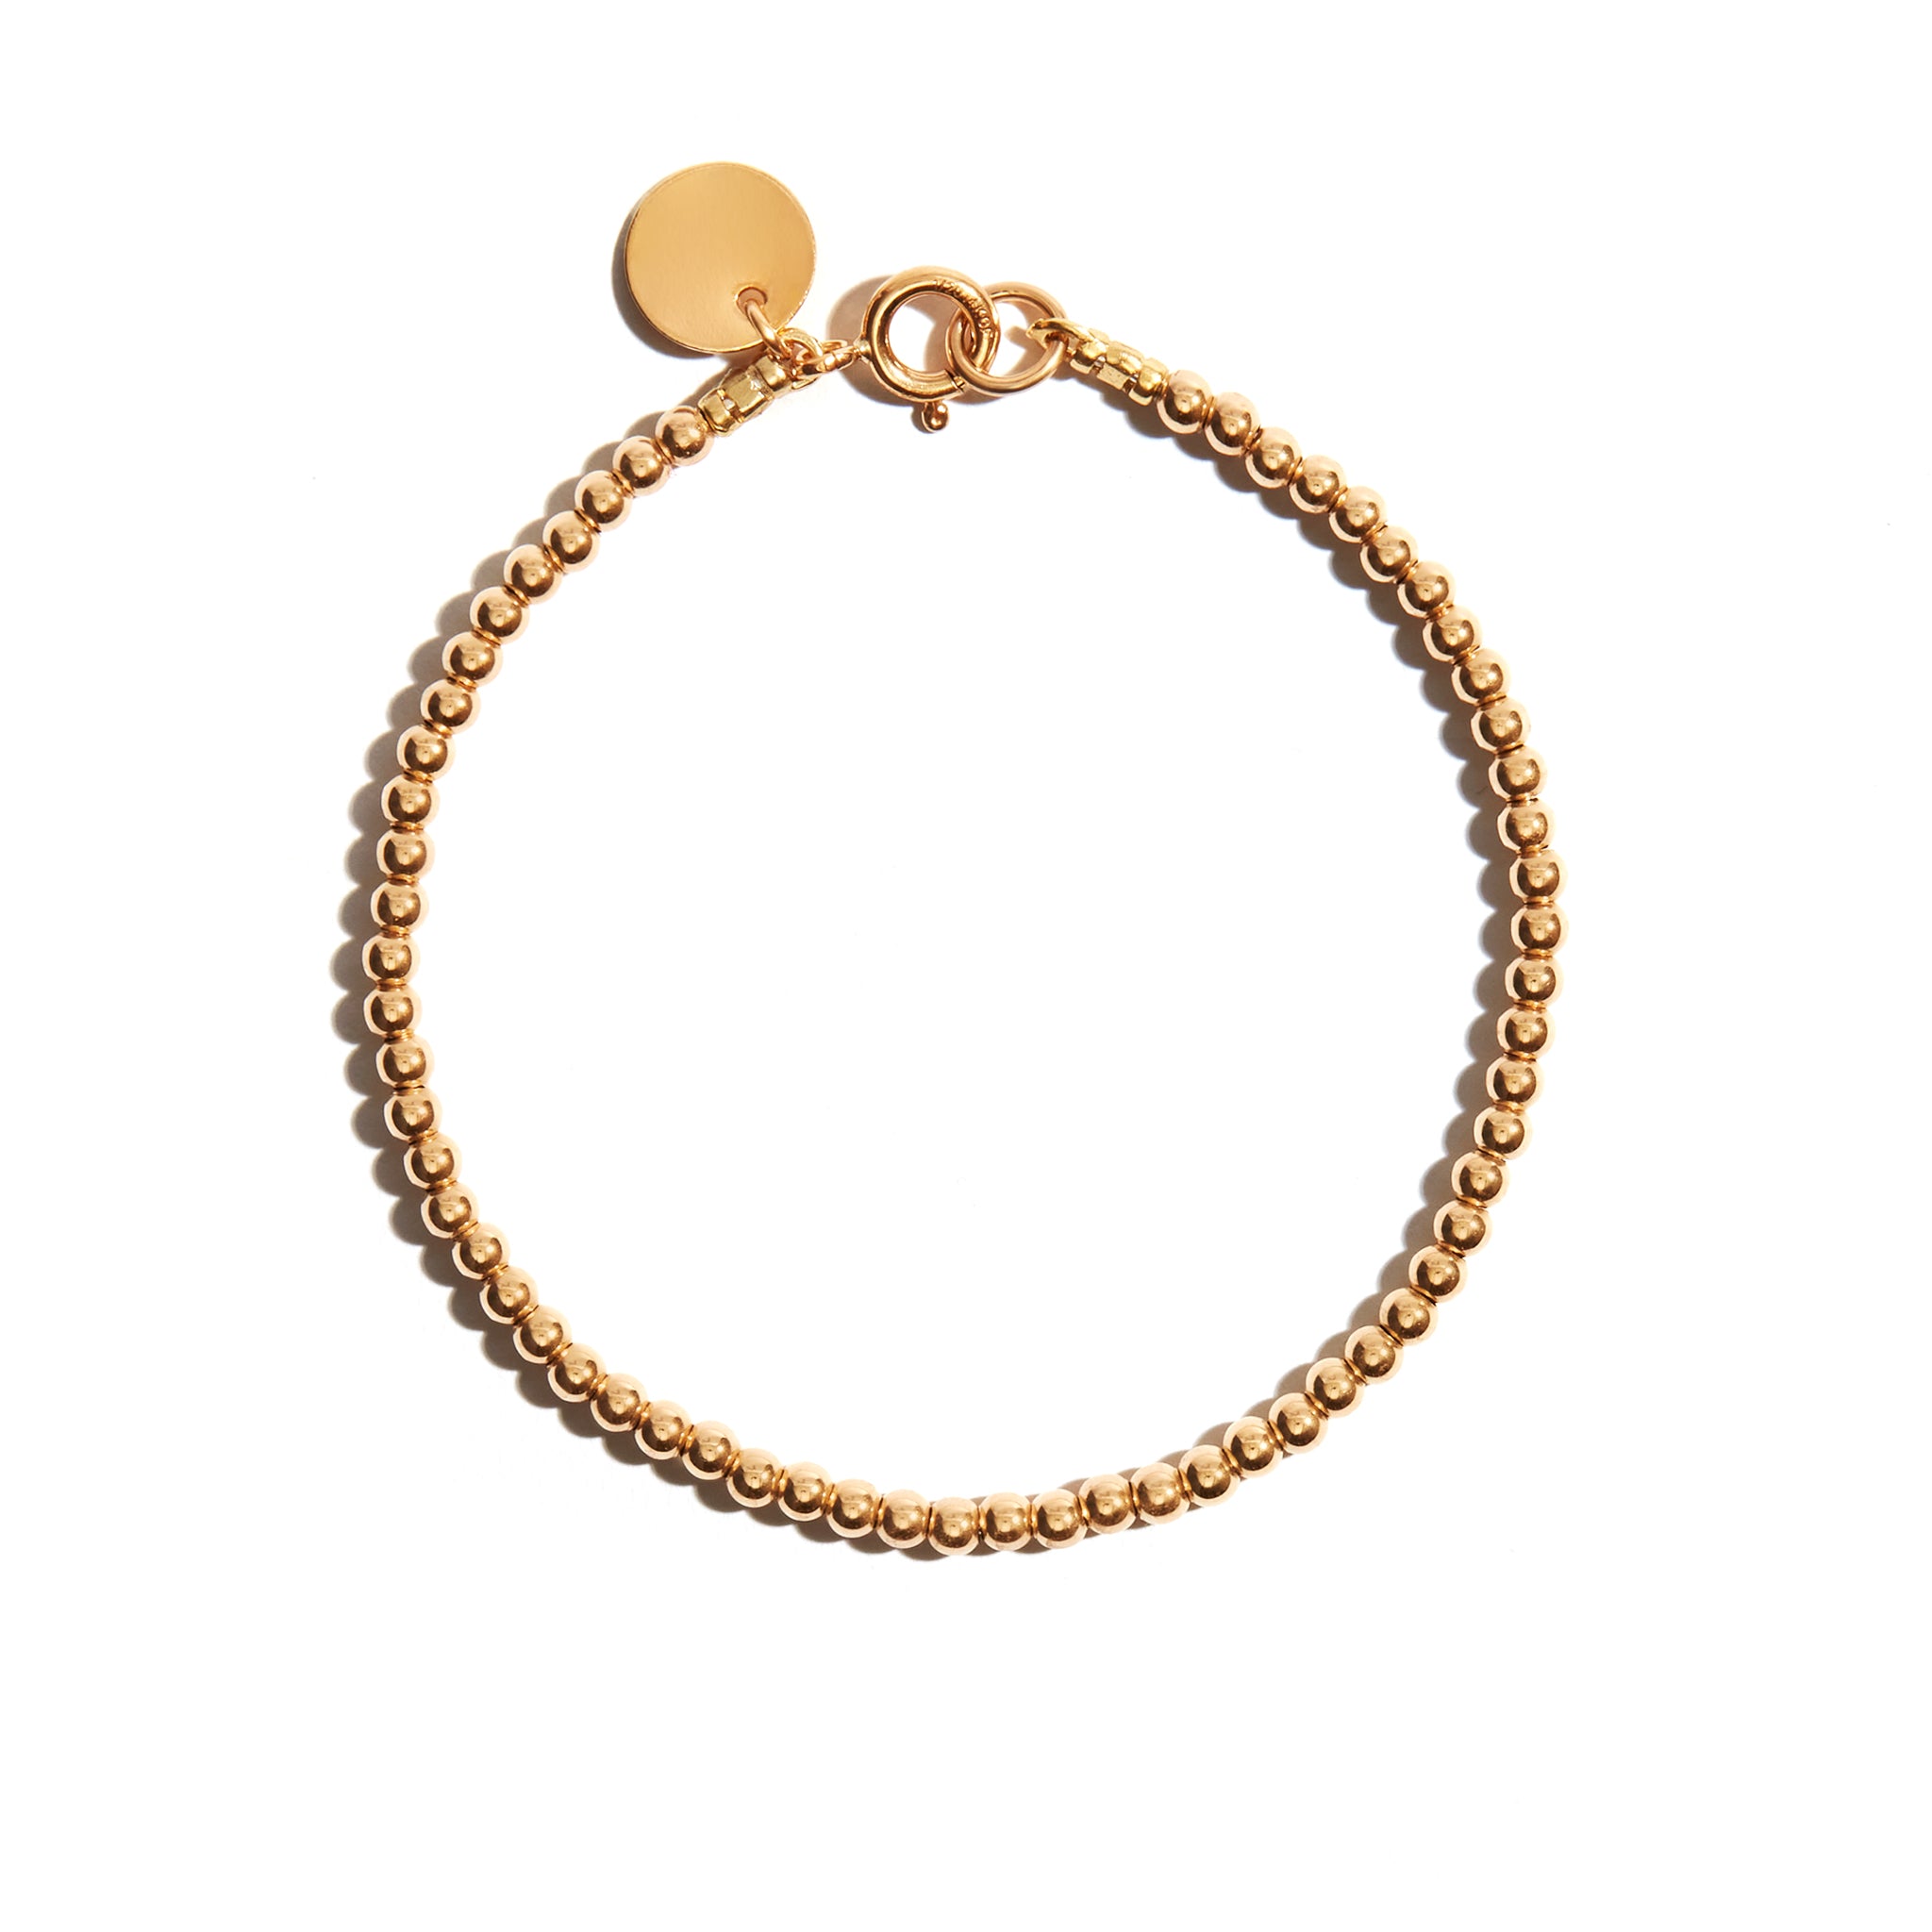 Photo of our Delicate Stacking Bracelet is a simple style with small, delicate gold beads and a gold coin charm at the clasp. It is a classic, simple style making it an elegant and feminine choice when worn alone, but is also a perfect base for stacking.